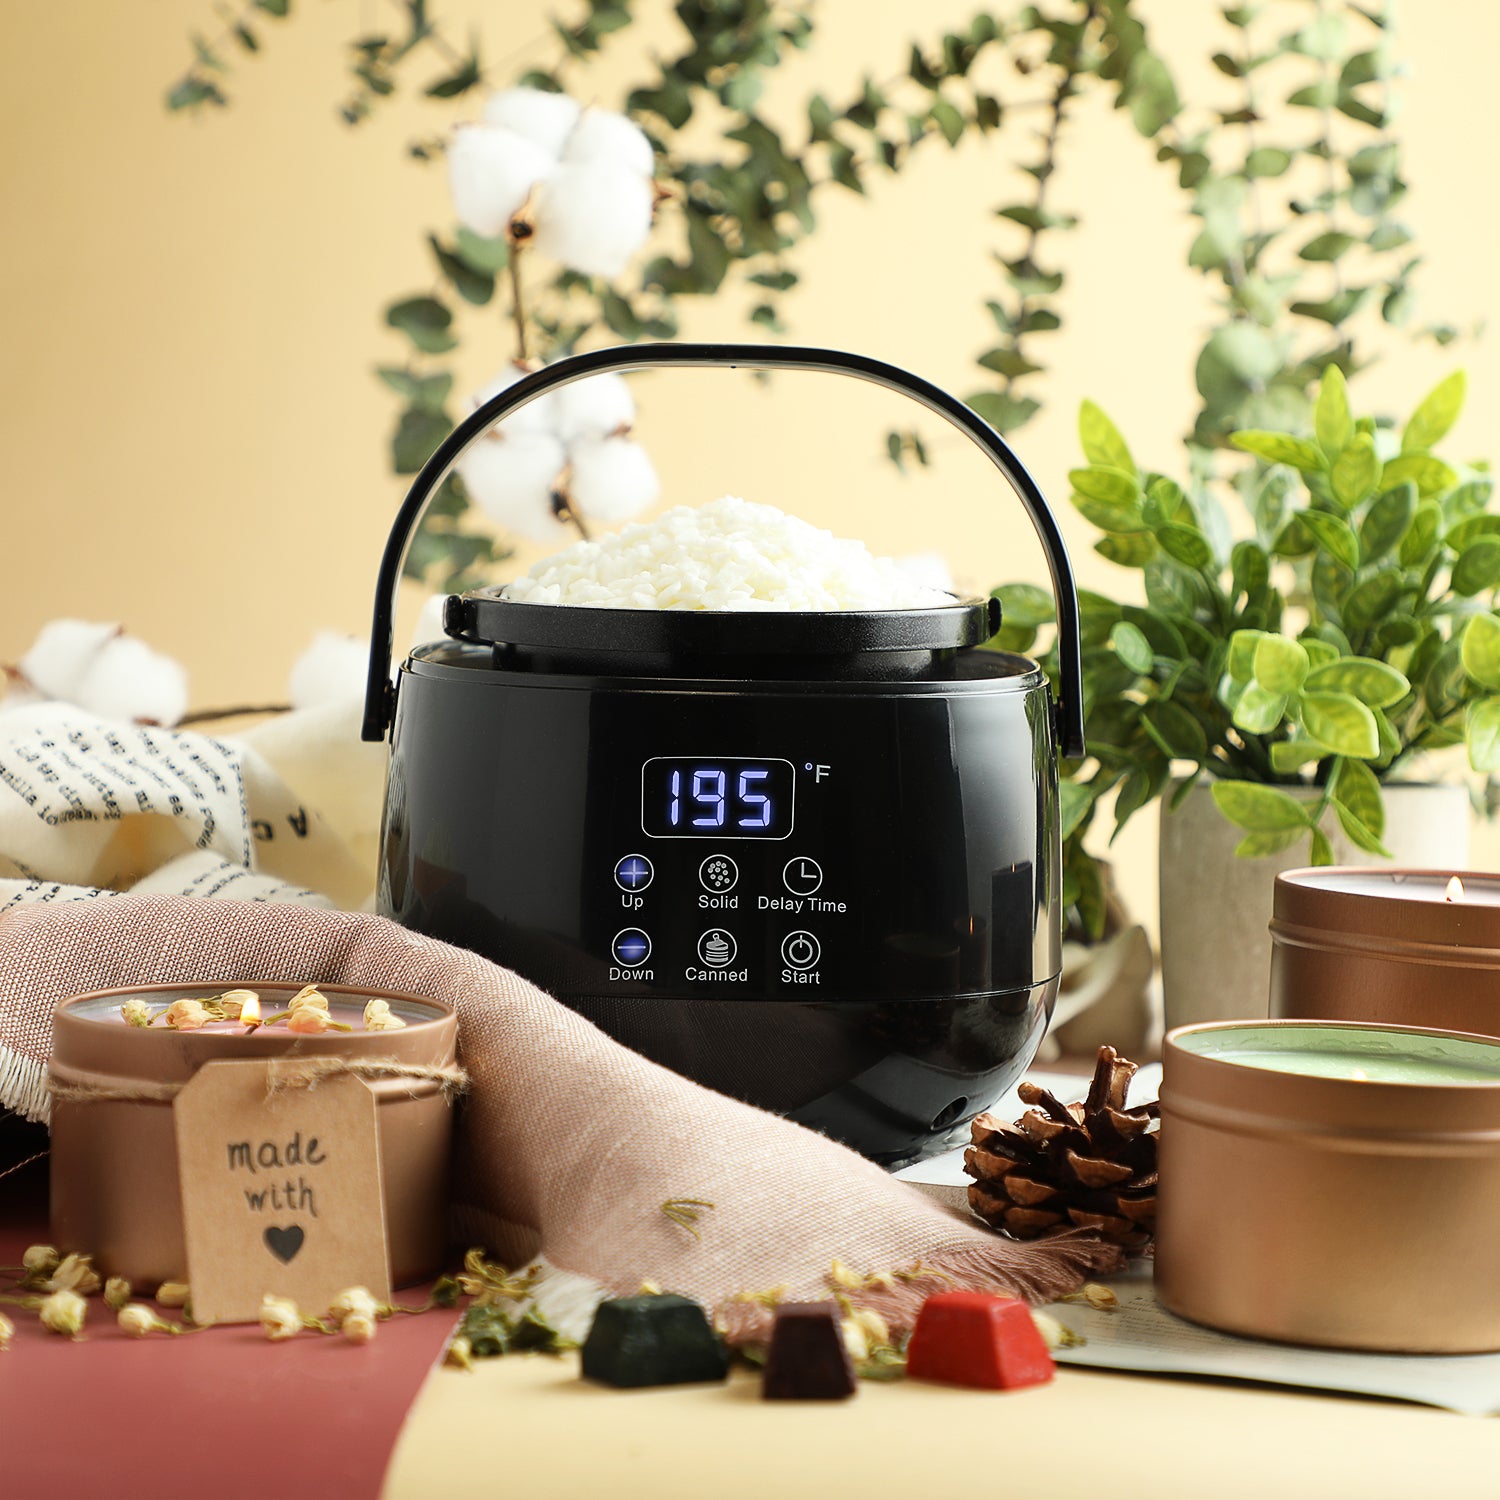 Candle Making Wax Melting Pot,Wax Melter for Candle Making,LED Temperature  Display for Adults Beginner,Soy Wax US Plug 